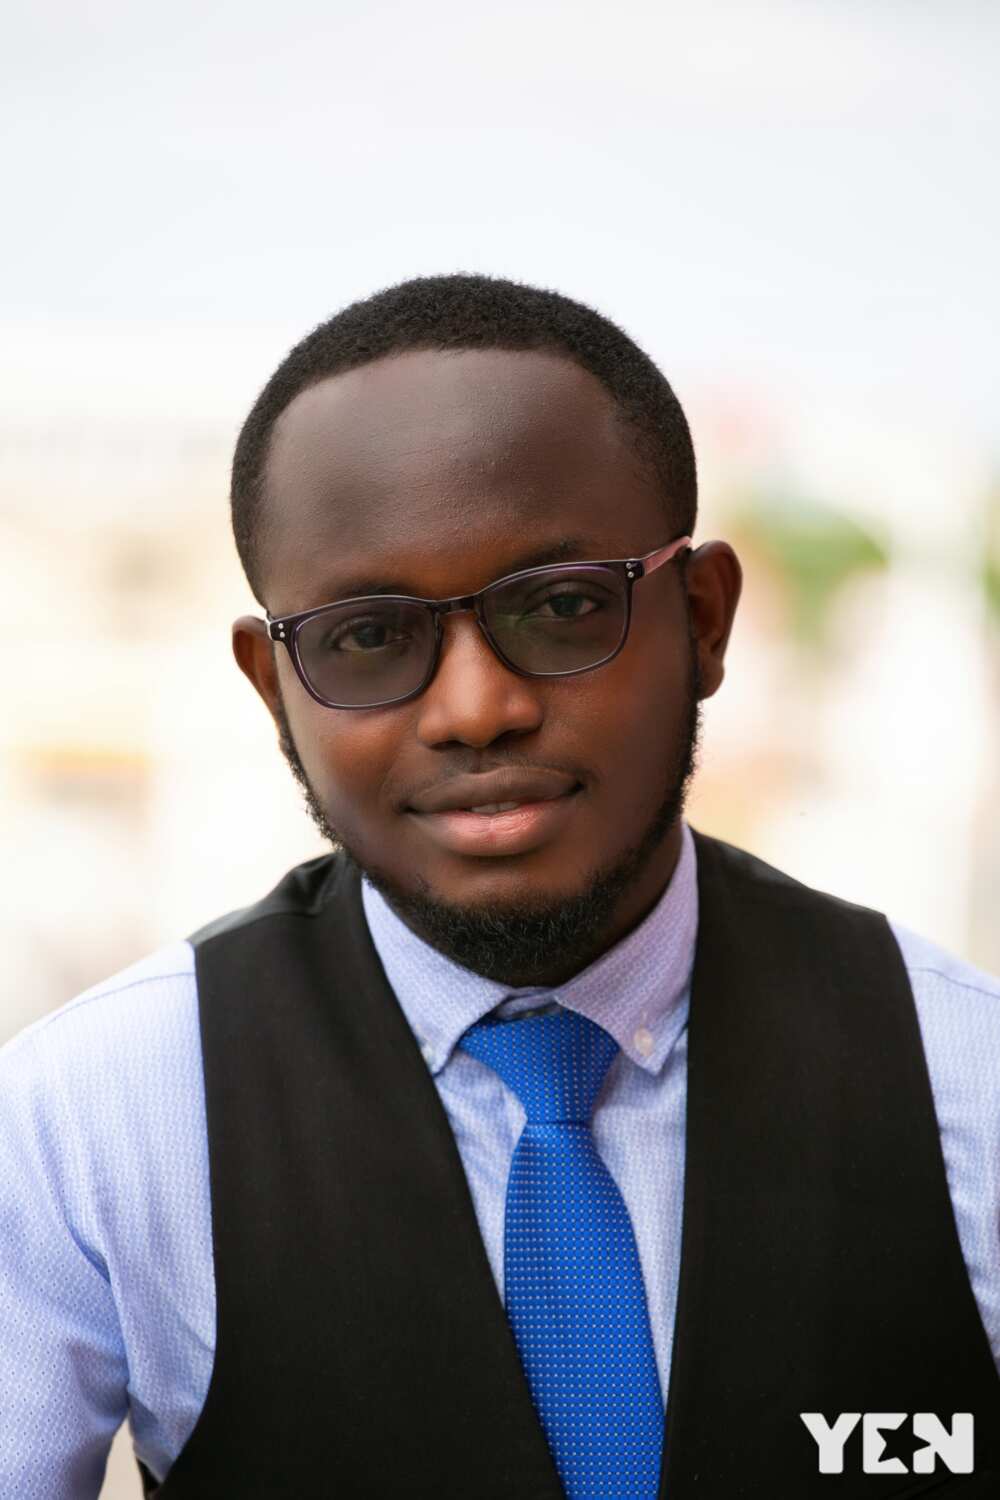 Meet Samuel Obour, Naa Ayeley and the other creative minds at YEN.com.gh